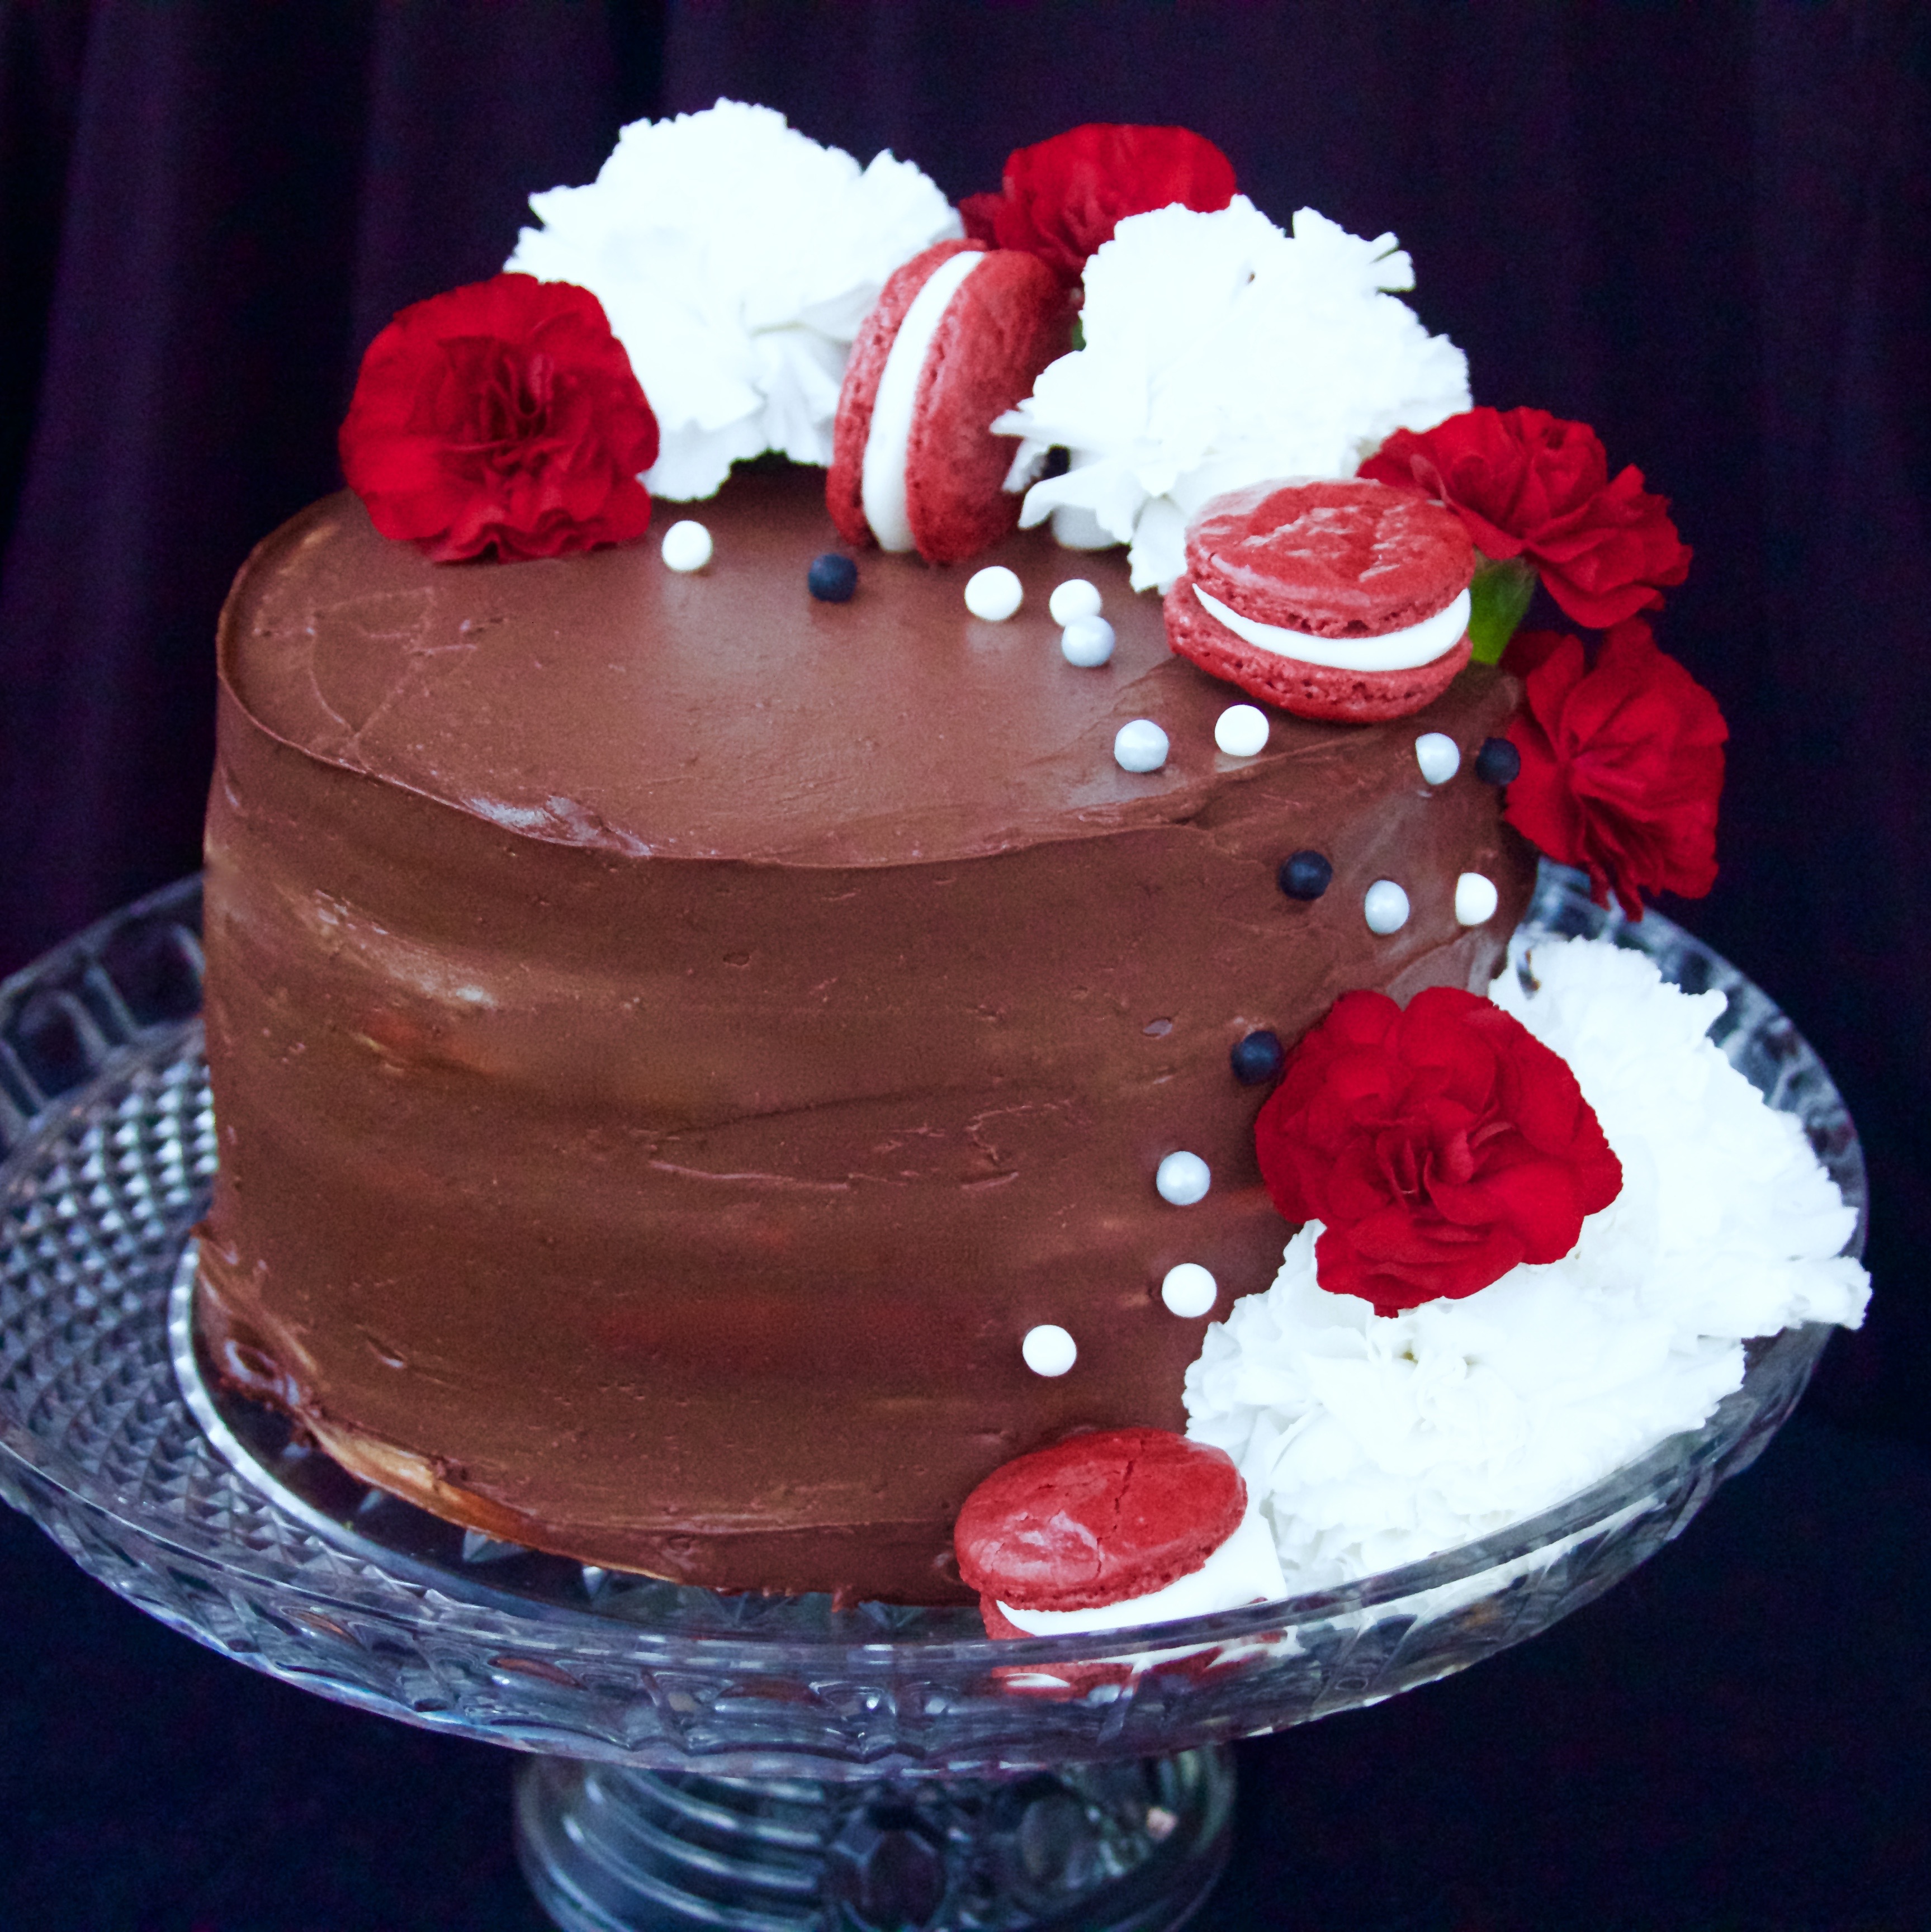 Red Velvet Layer Cake with White Chocolate Mousse and Chocolate Ganache